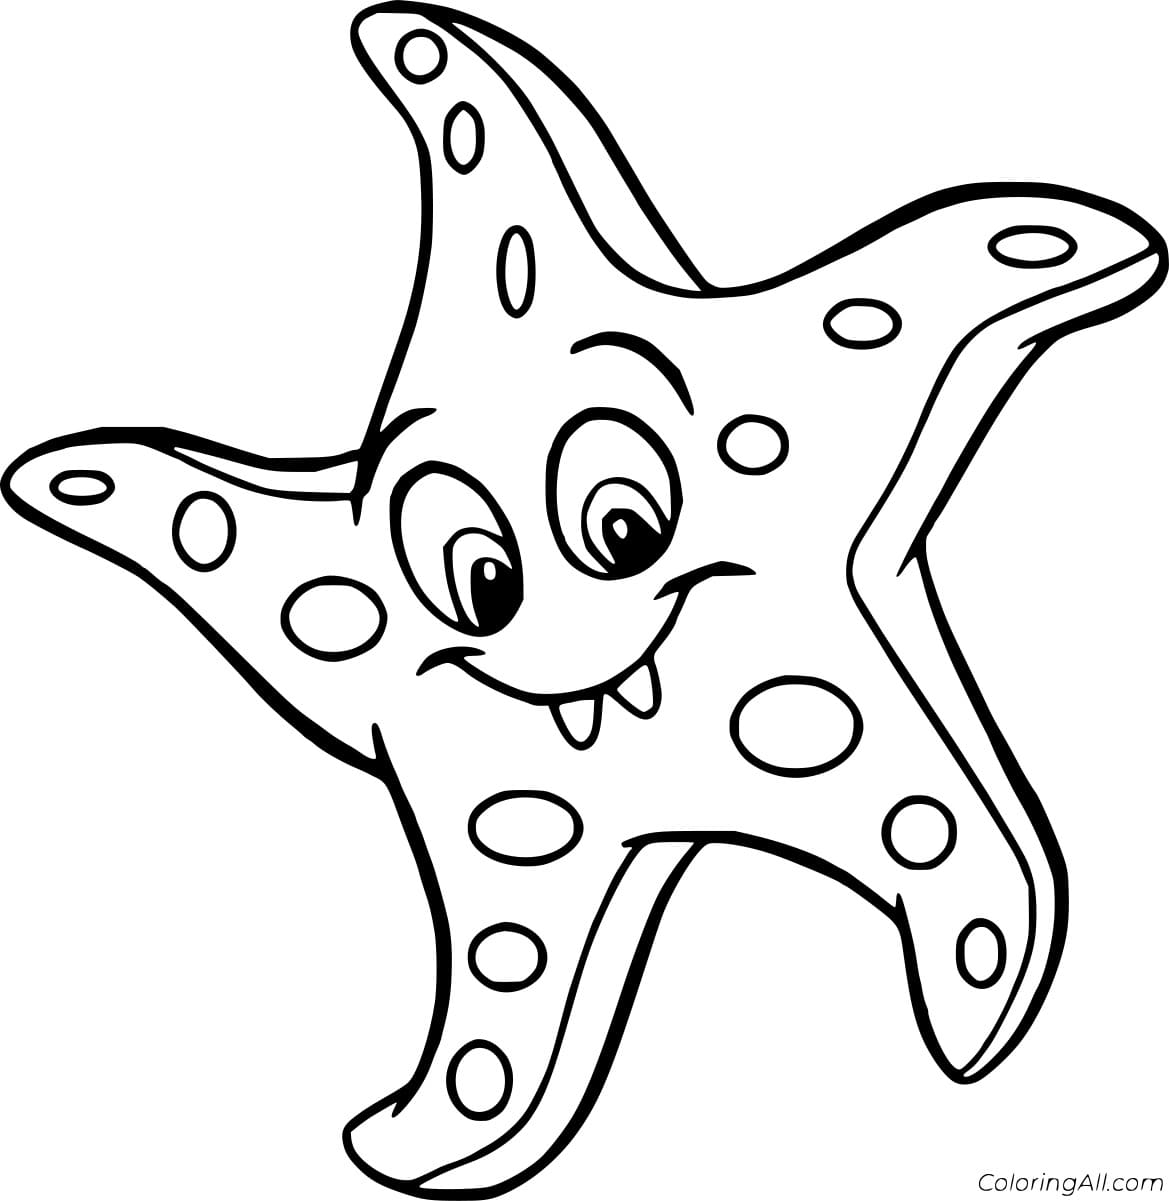 Cute Sea Star Image Coloring Page